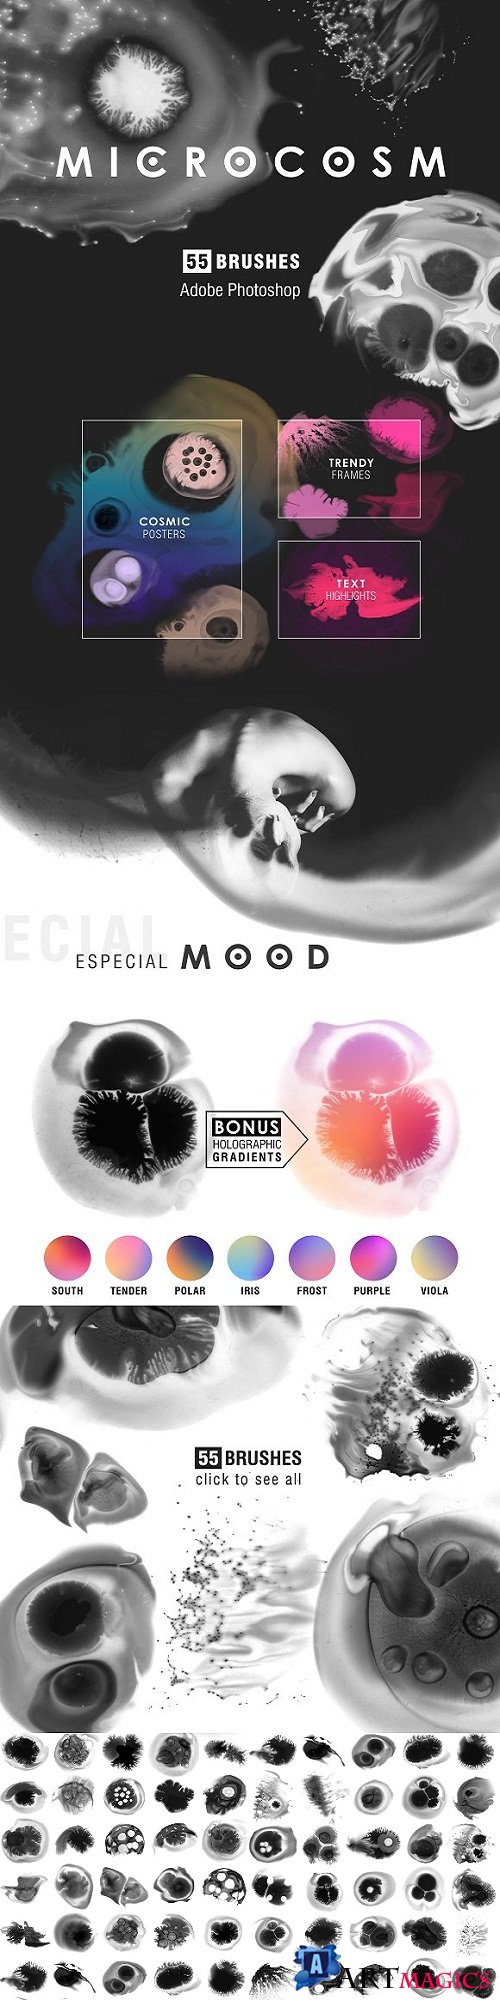 MICROCOSM - 55 Photoshop brushes - 2594593 (Updated)